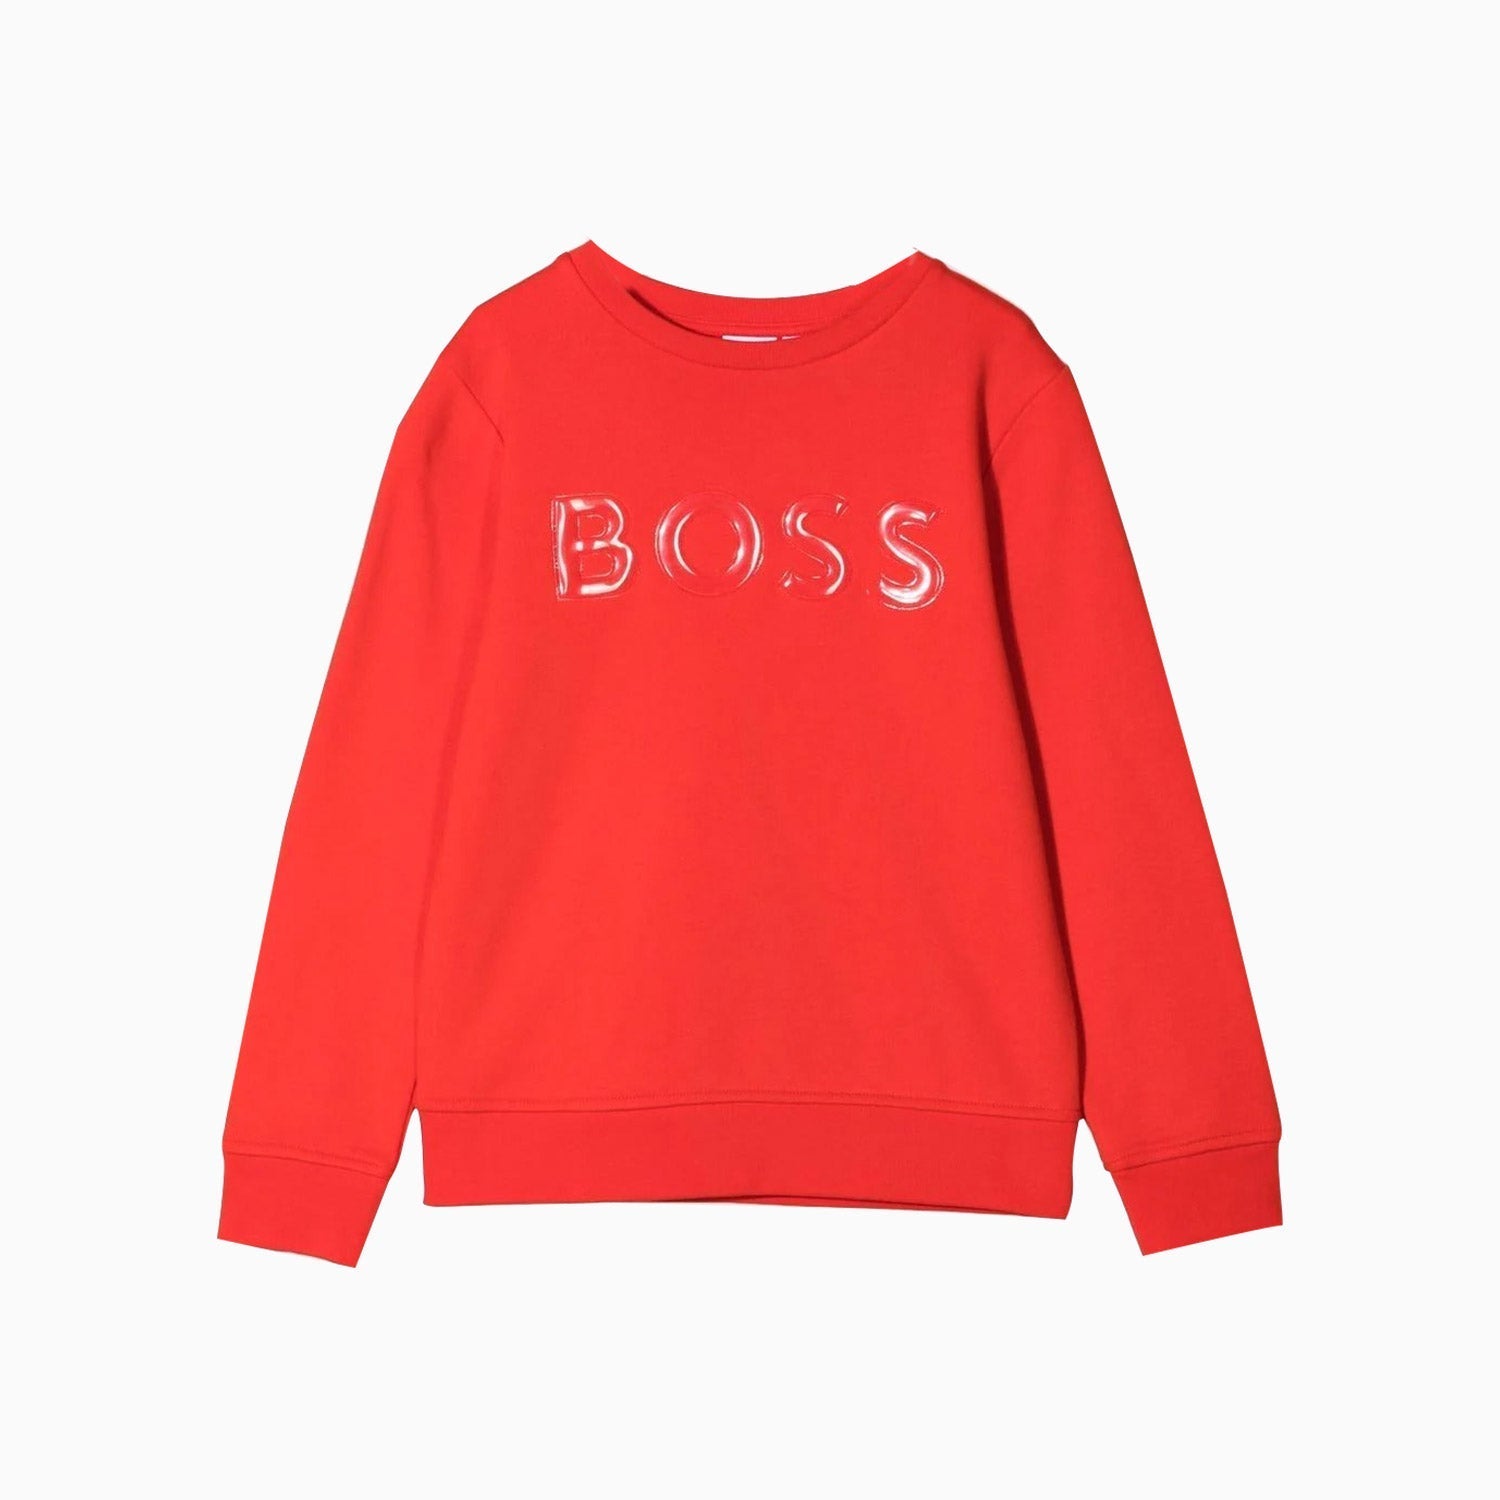 Hugo Boss Kid's French Terry Sweat-Shirt - Color: Bright Red - Kids Premium Clothing -